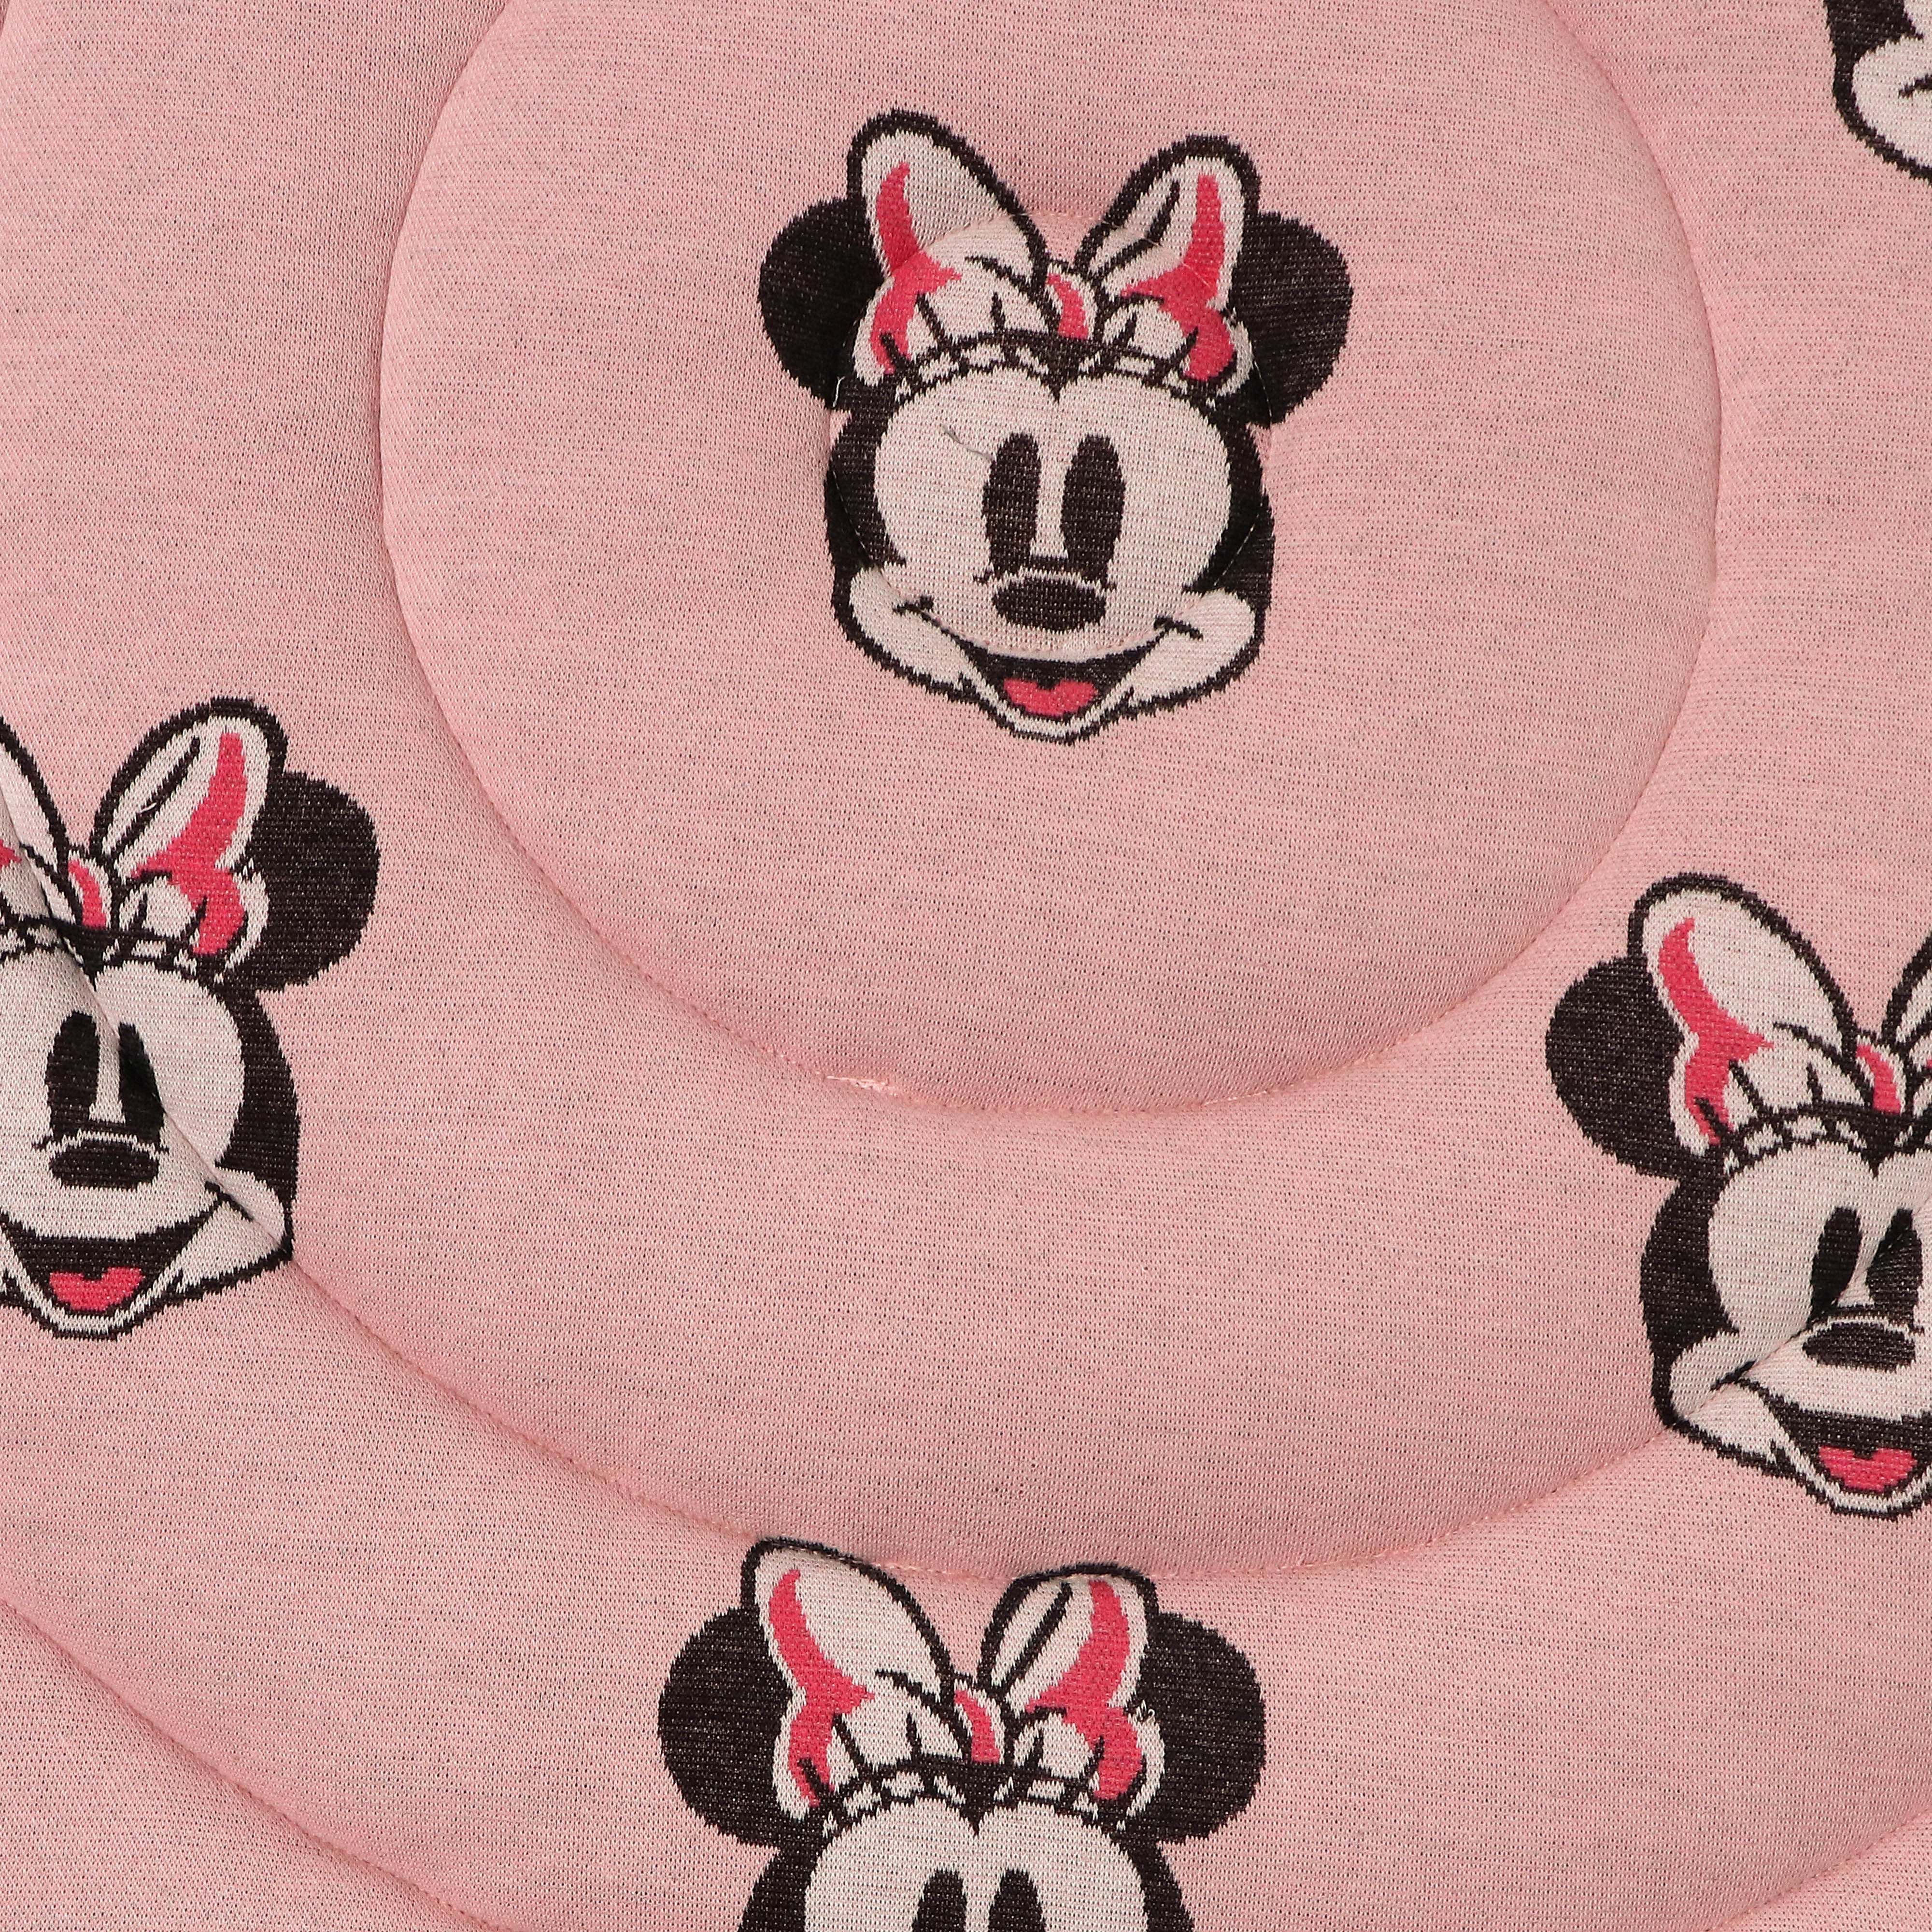 Disney Baby Activity Mat, Play Mat for Baby, Baby Mat for Floor, Playmat for Babies, 100 cm Round Play Mat for Playpen, Soft & Skin-Friendly Cotton Fabric, Foldable (Minnie Mouse)